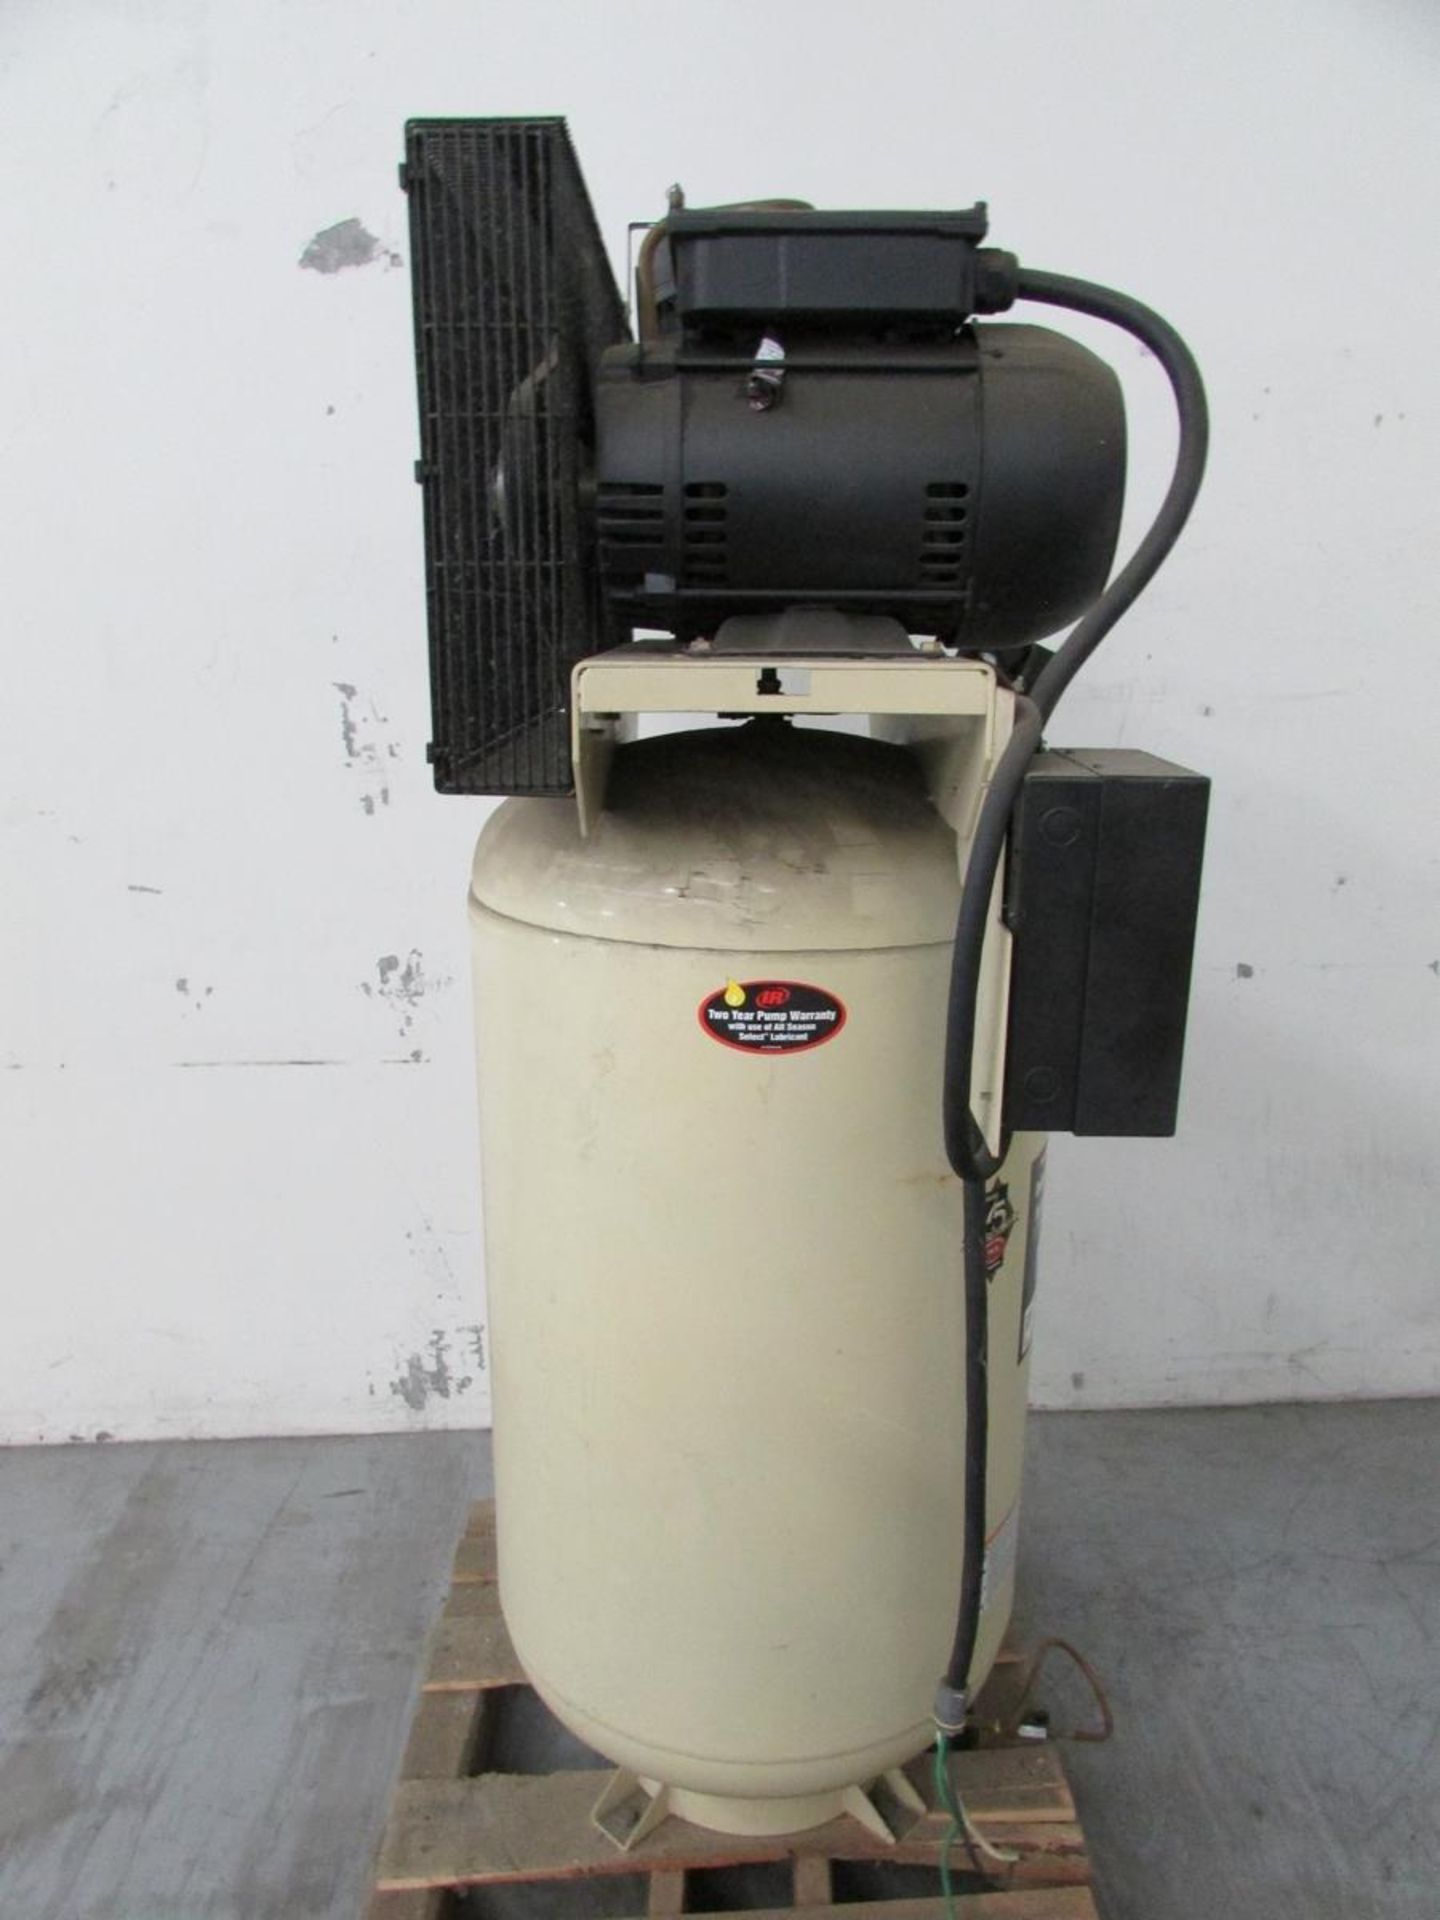 Ingersoll Rand TS7N7.5 7-1/2HP 2-Stage Vertical Tank Mounted Air Compressor - Image 15 of 20